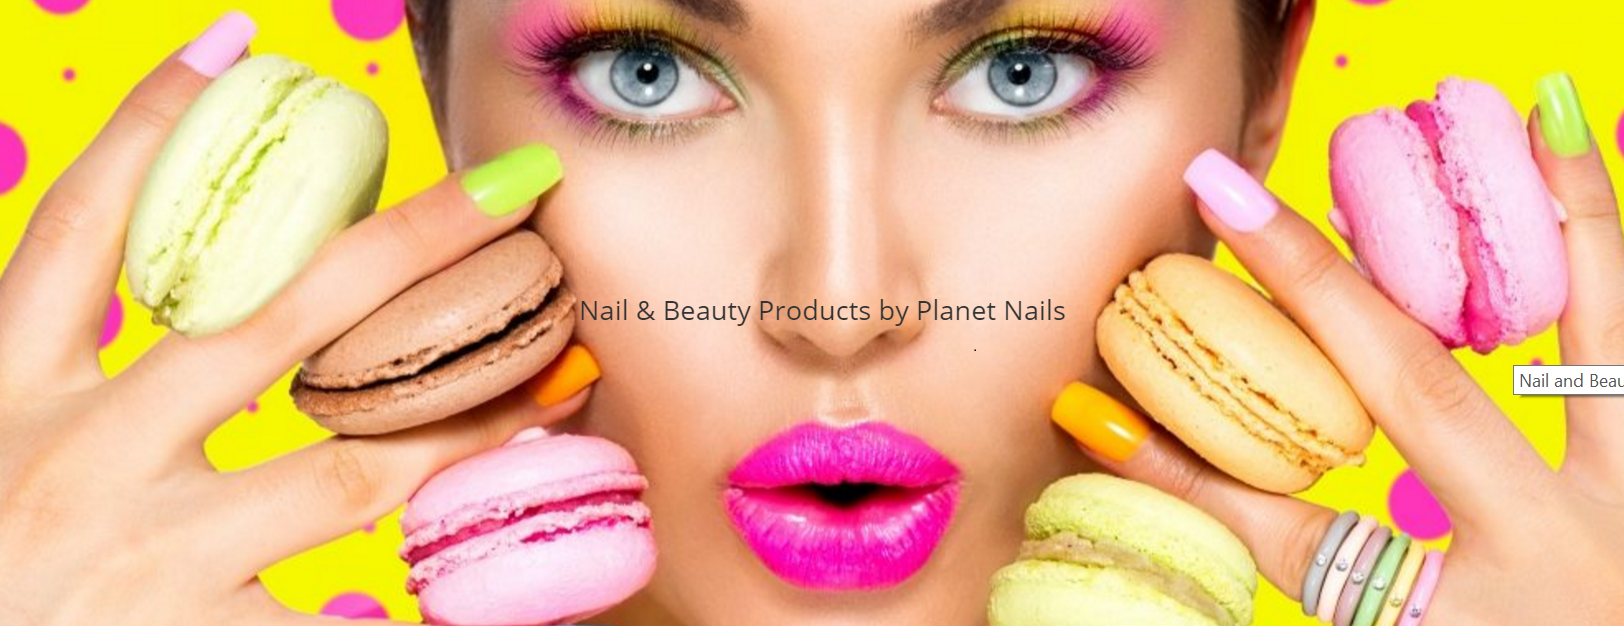 beauty products suppliers